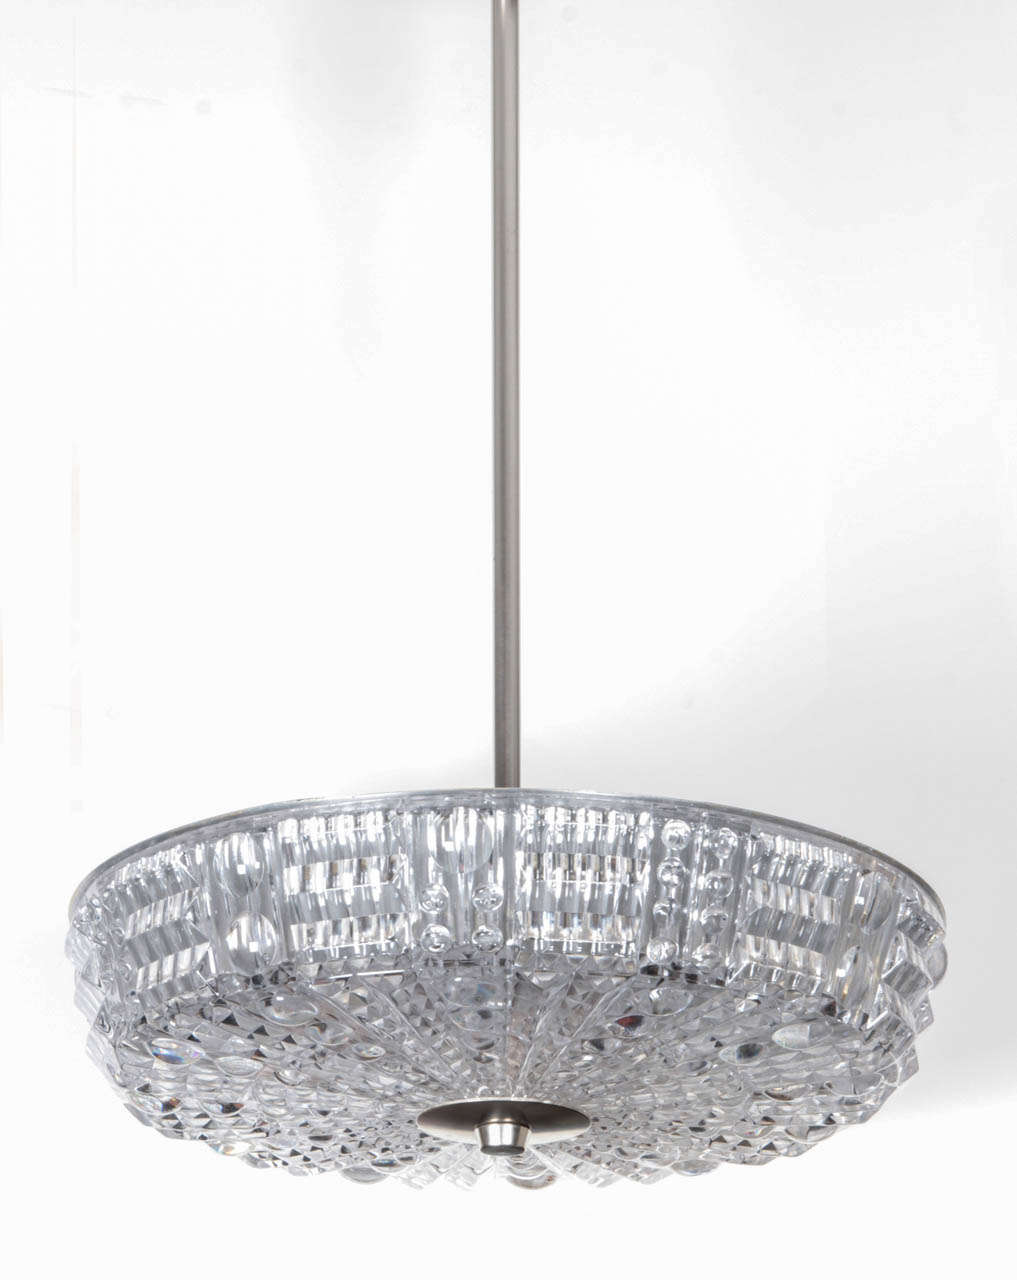 Fantastic deep cut faceted crystal pendant chandelier on a satin nickel stem with canopy. Stem can be removed to use as a flush mount.